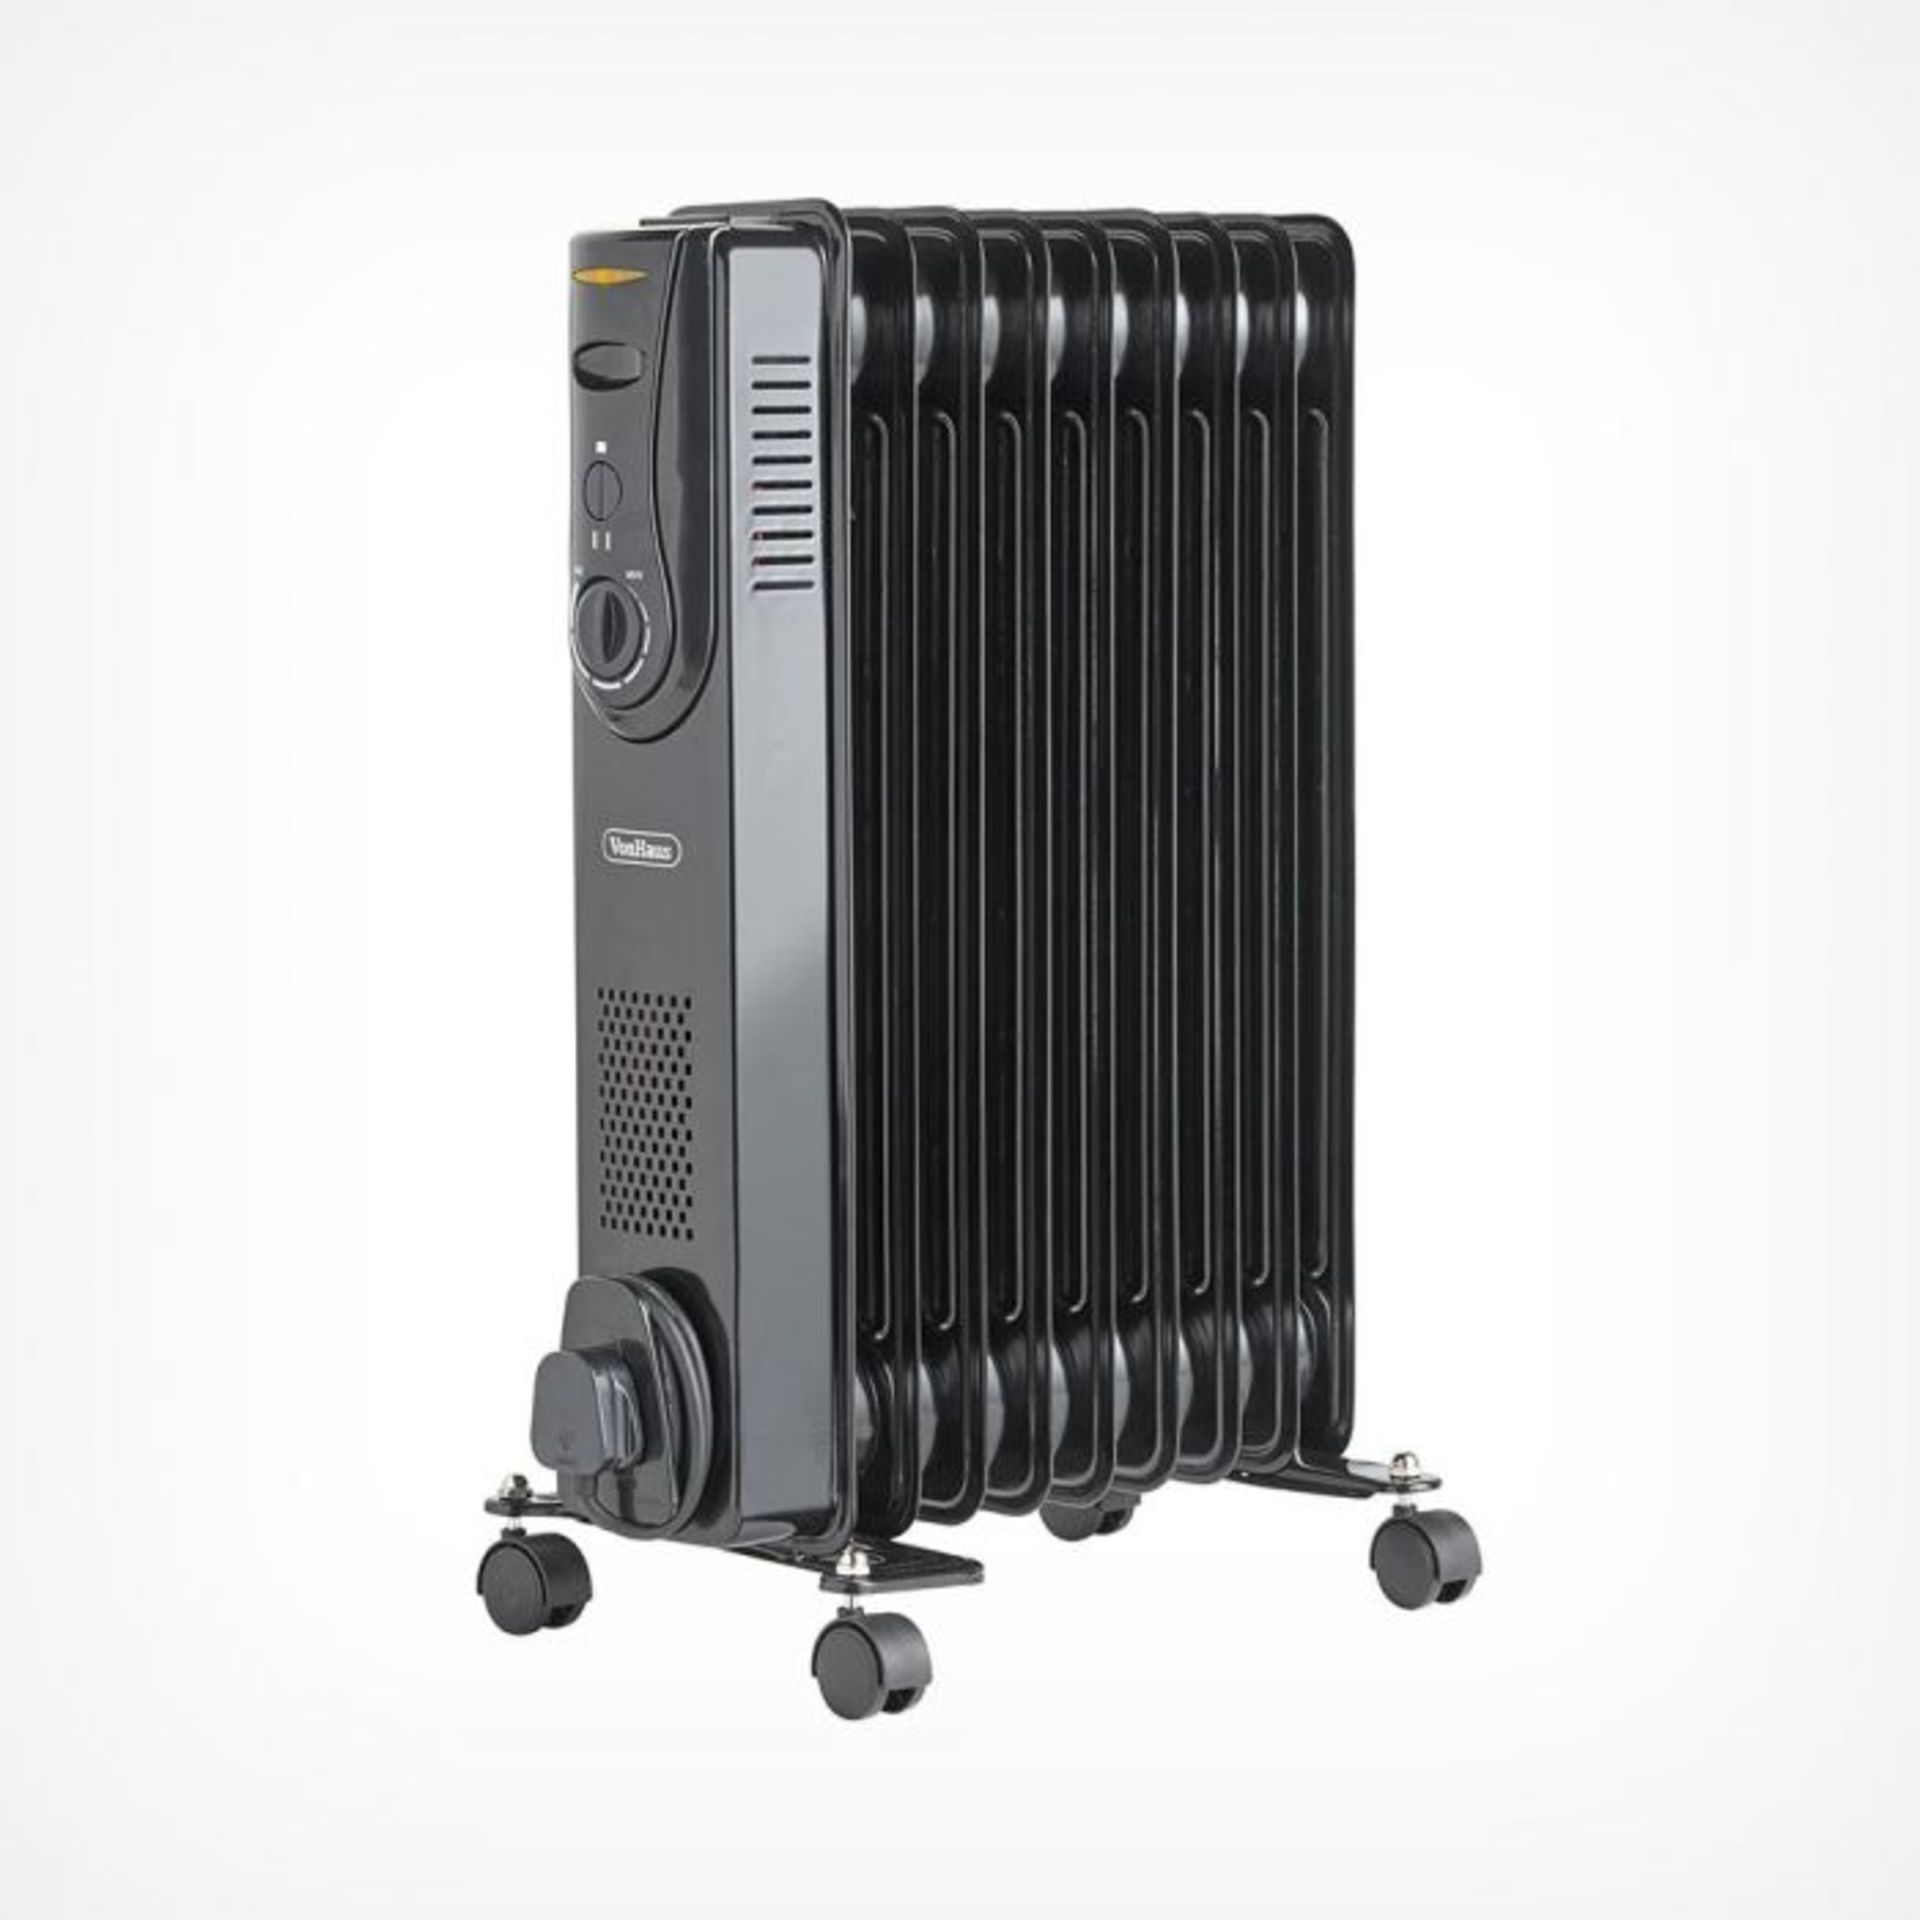 (V7) 9 Fin 2000W Oil Filled Radiator - Black Powerful 2000W radiator with 9 oil-filled fins ??... - Image 2 of 3